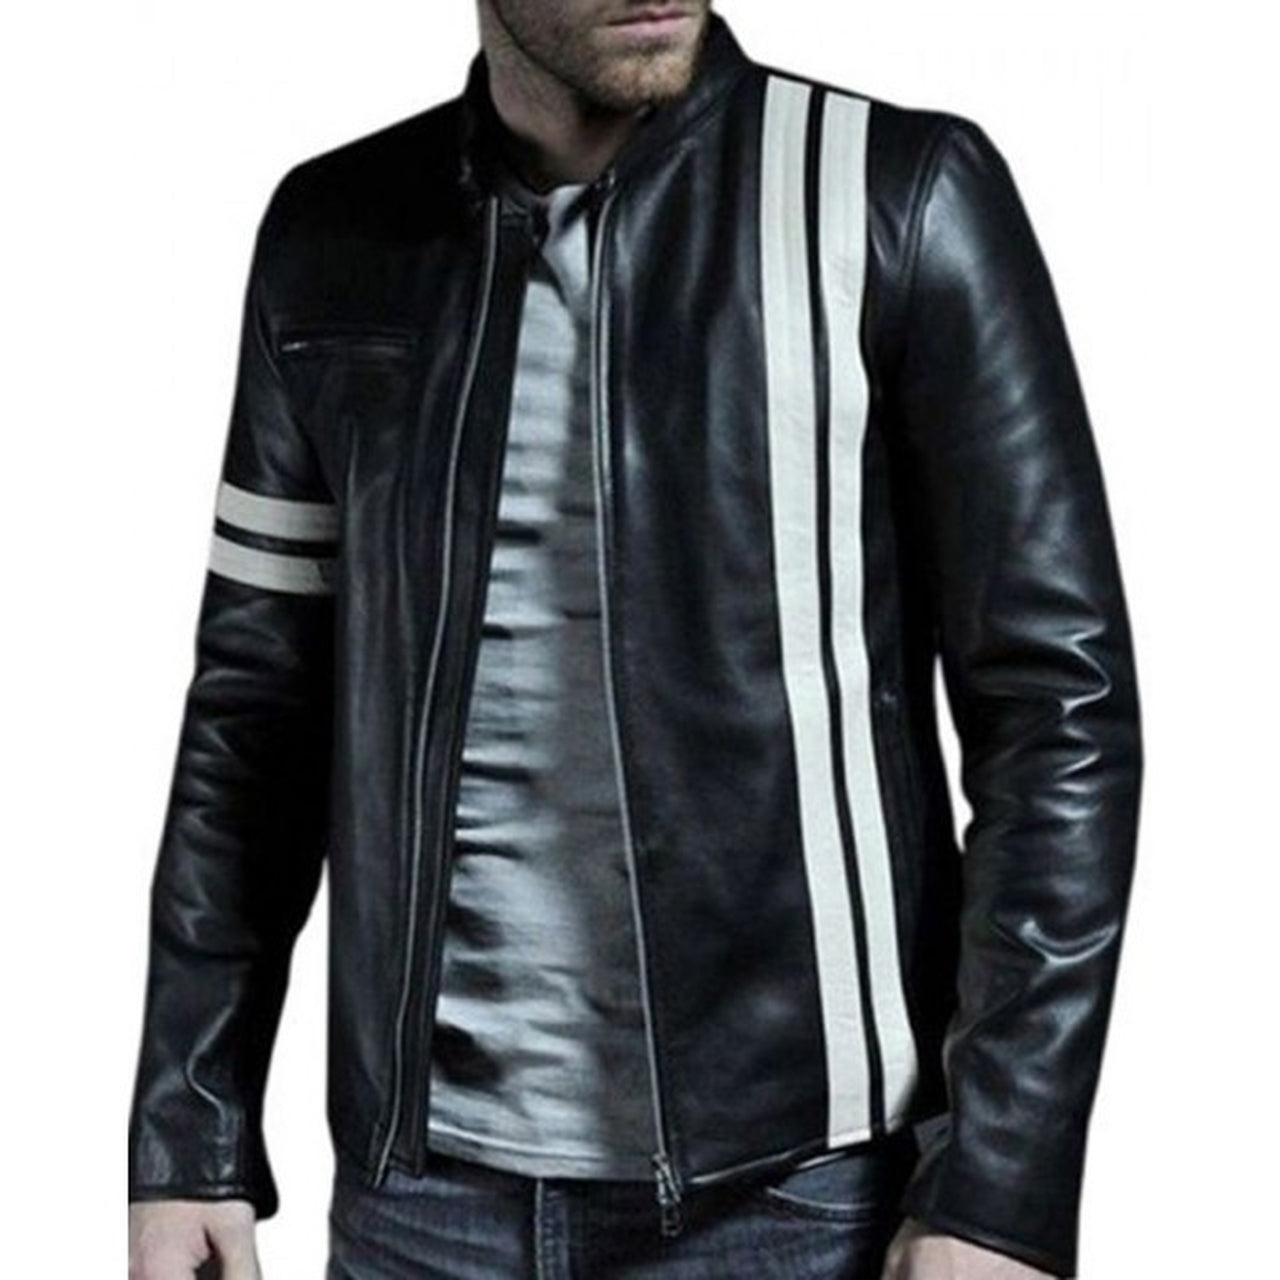 Unique Genuine Leather Jacket with White strap and lining